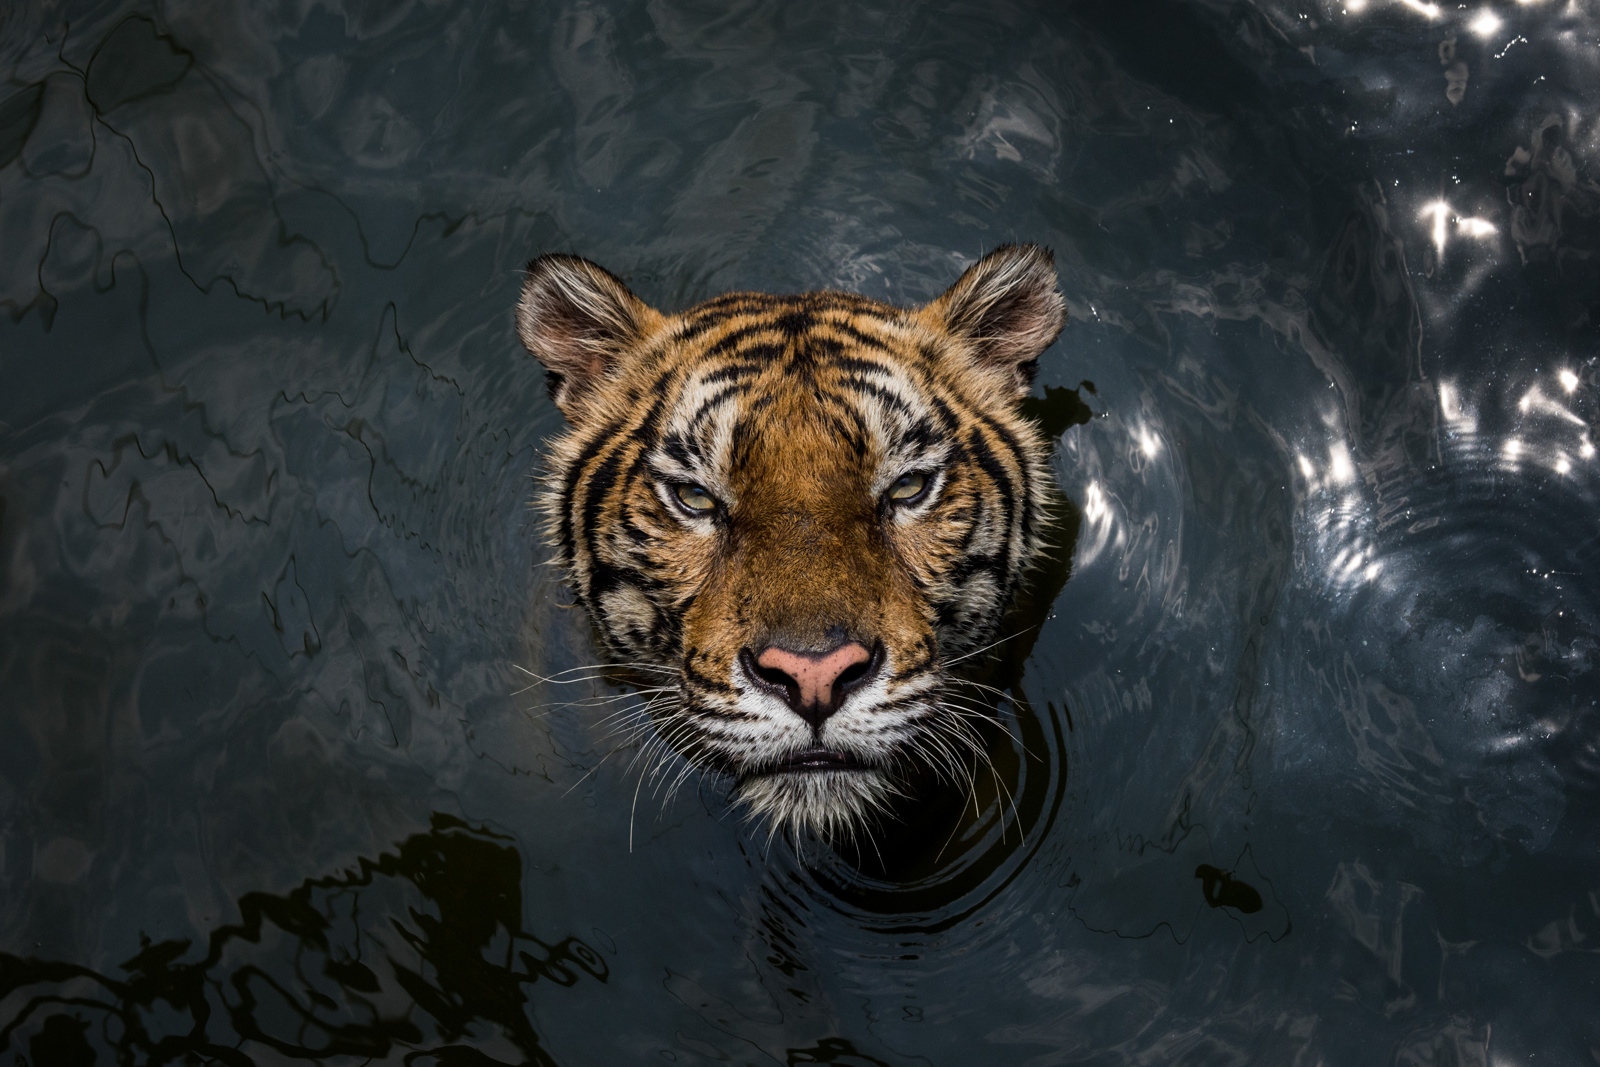 Recent - Tooth and Nail : Thailand's Tiger Crisis [The New York Times]